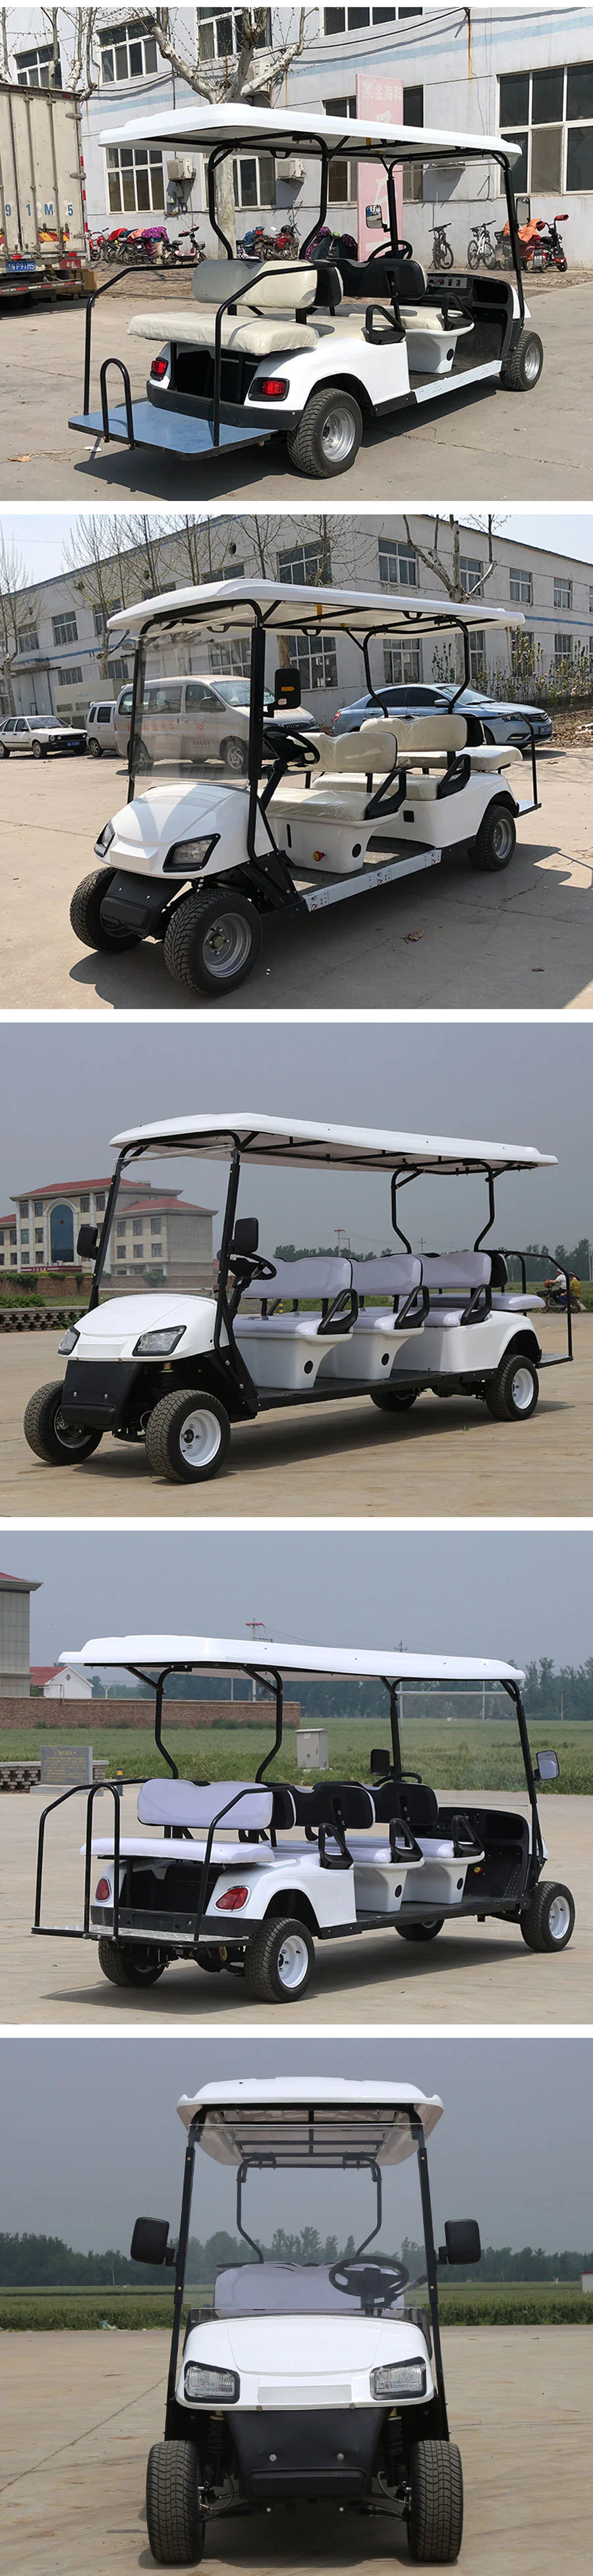 Personal 4 Seater Street Legal Golf Cart with Low Price